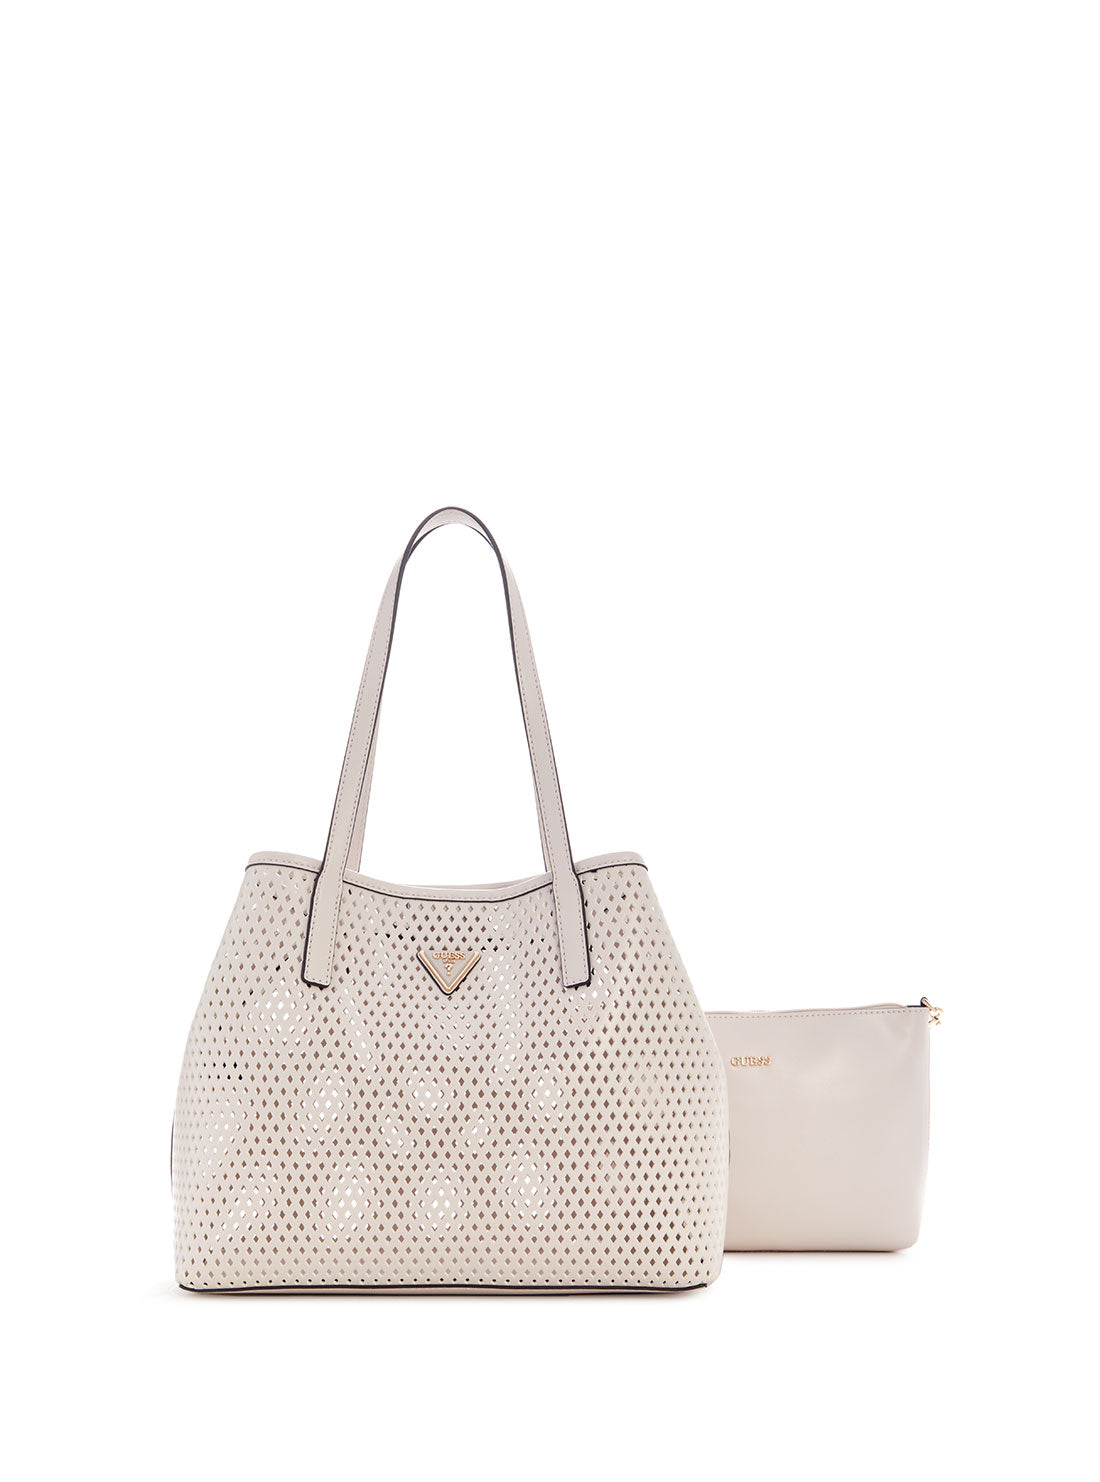 GUESS Women's Stone Woven Vikky Tote Bag WP699523 Full View